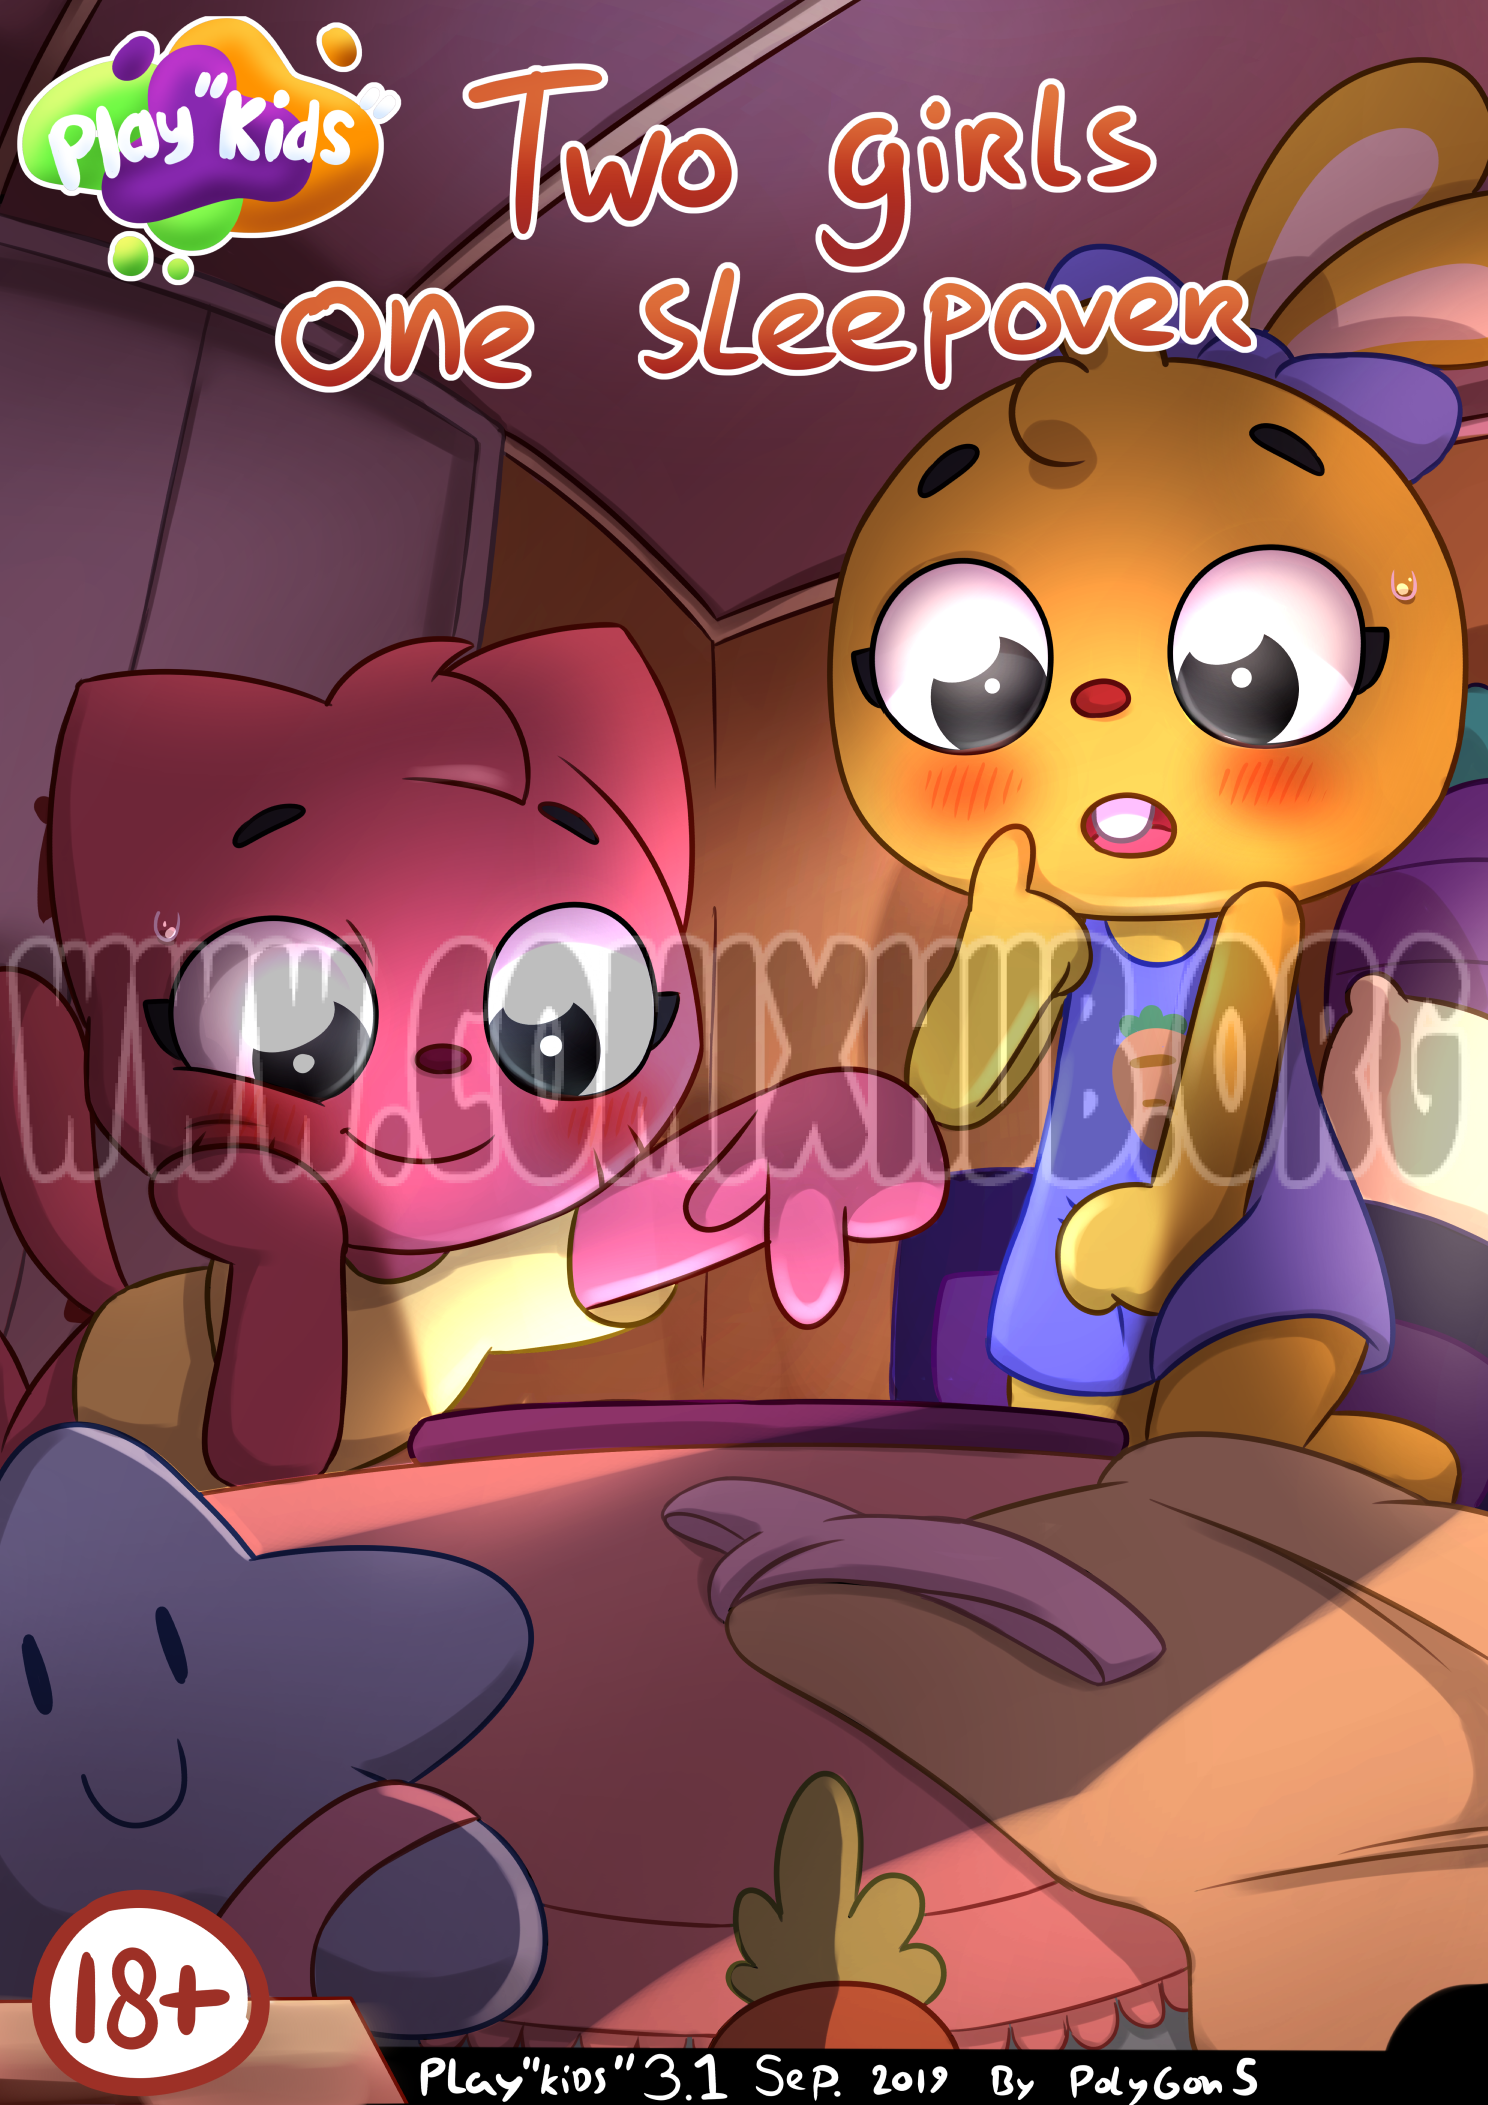 Two girls One sleepover porn comics Furry, fingering, Lesbians, Lolicon, Virgin